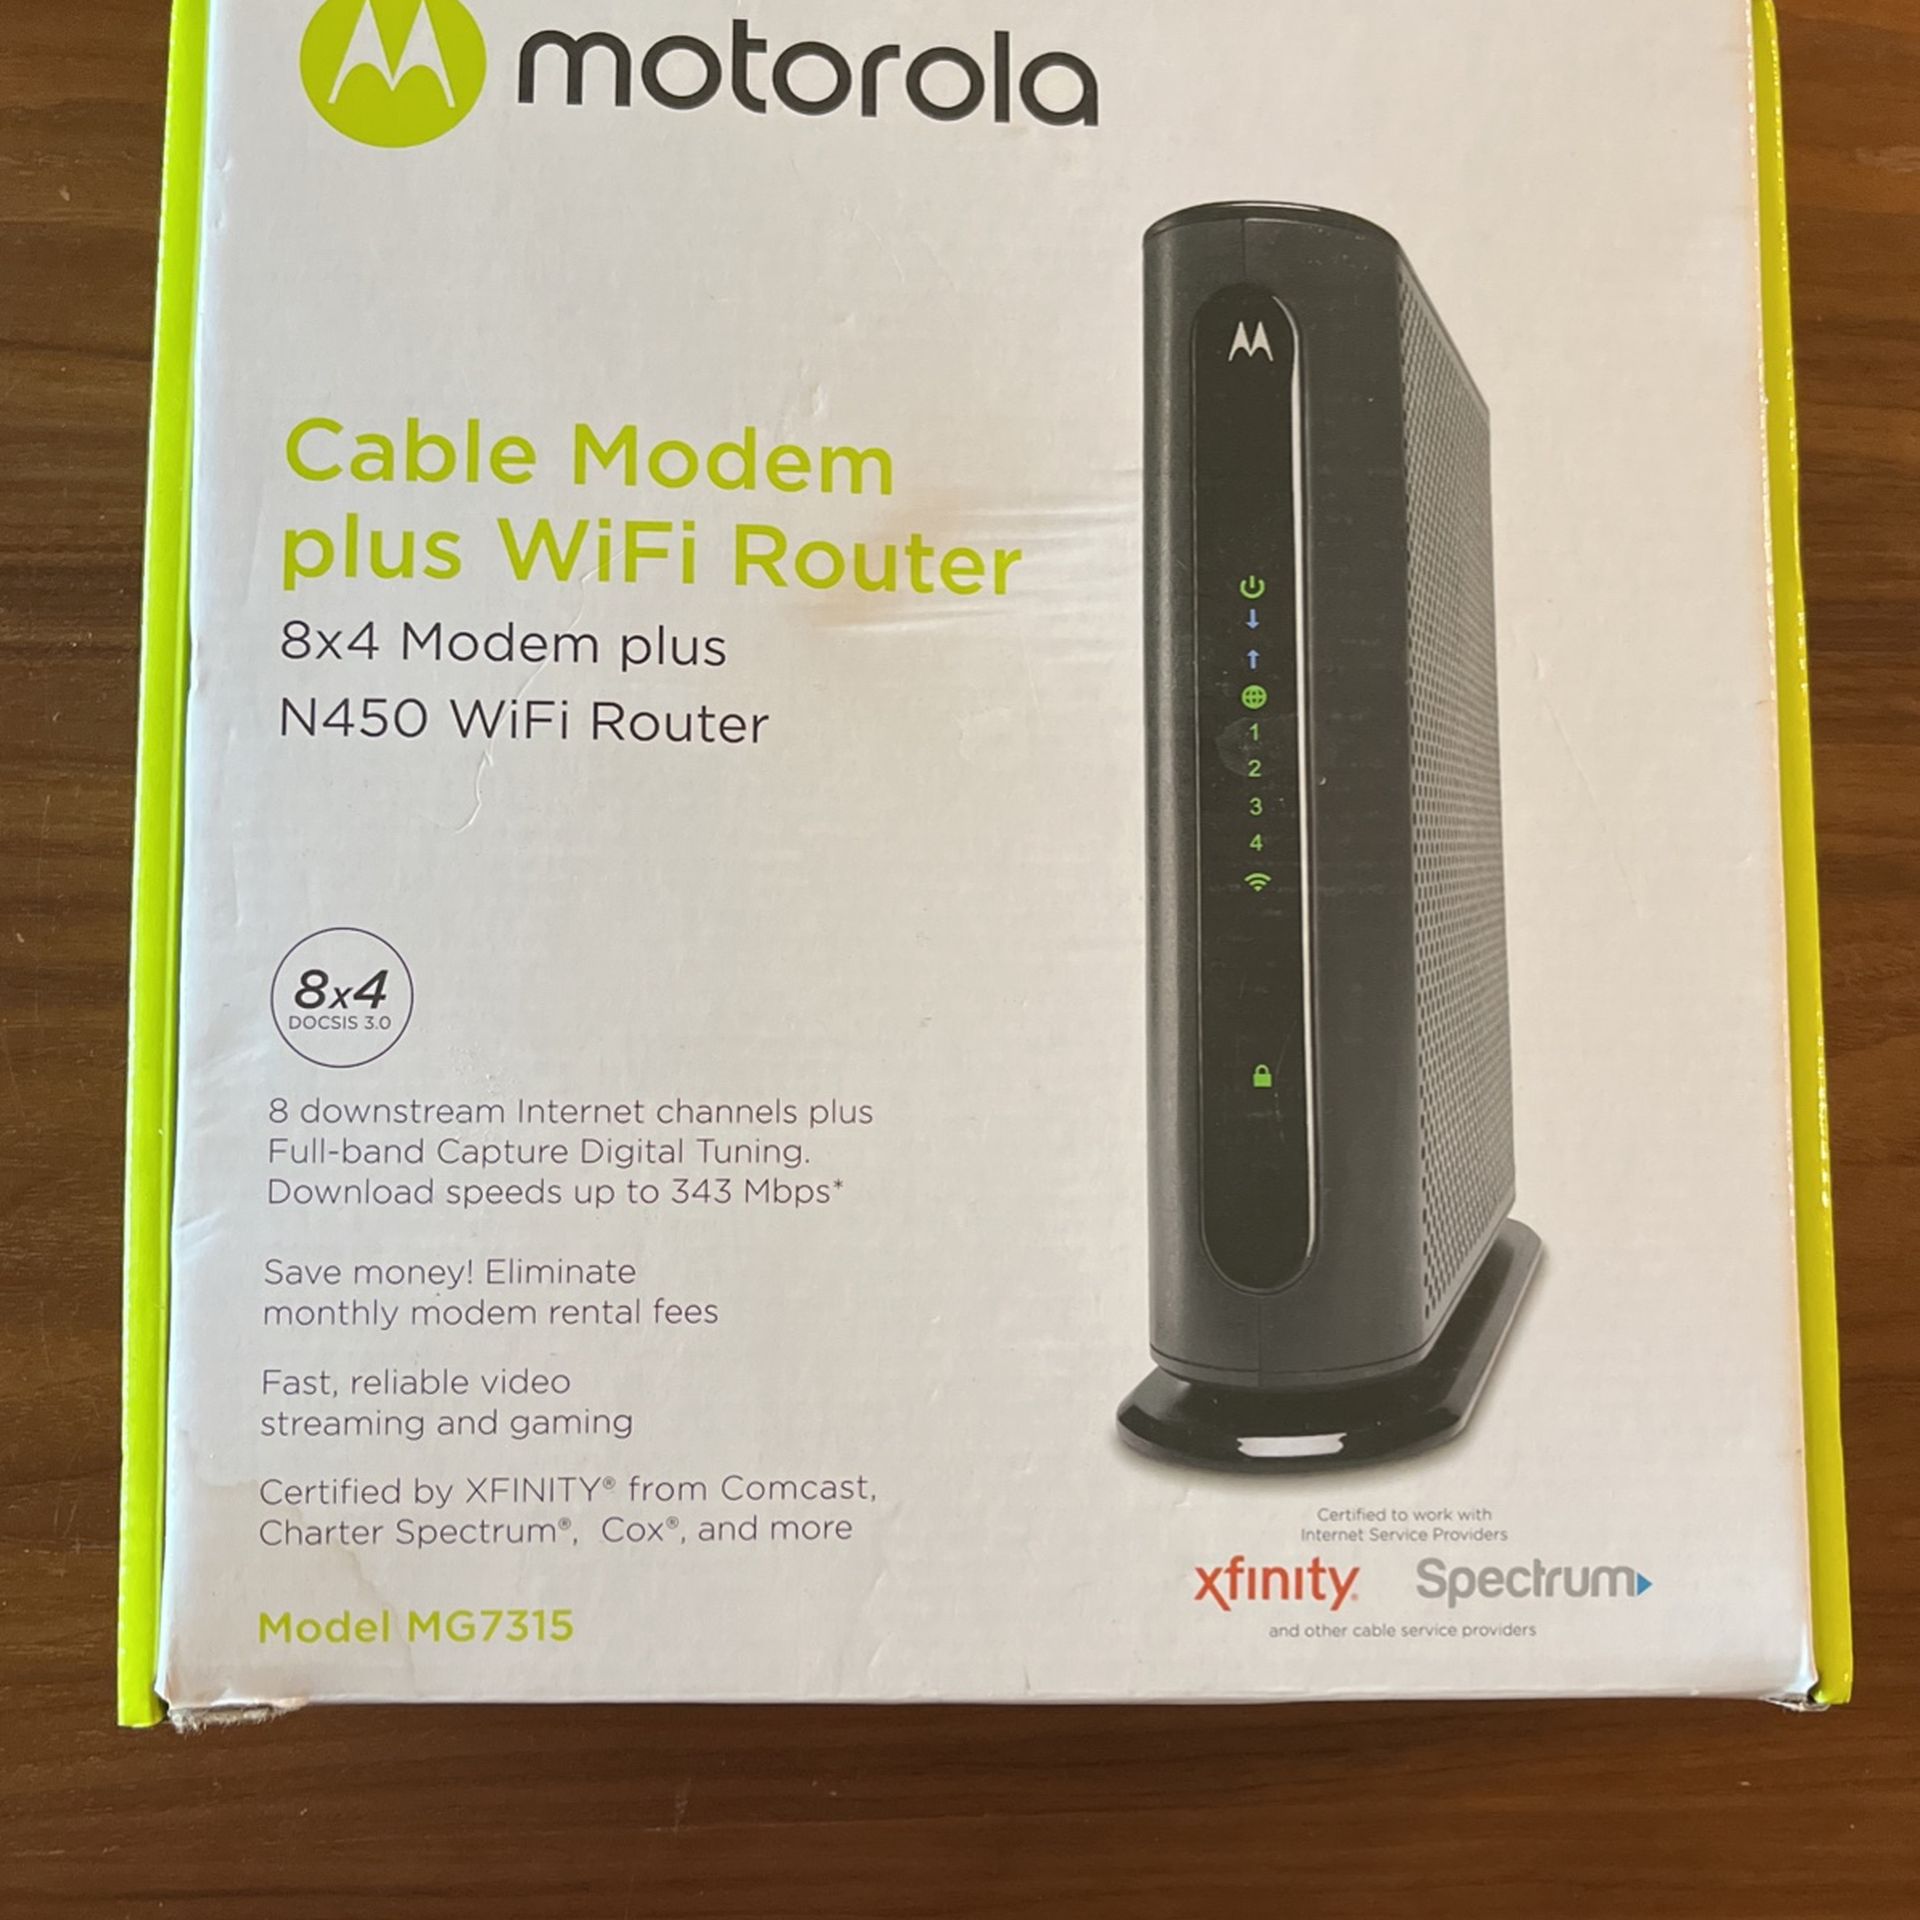 Cable Modem with WiFi Router